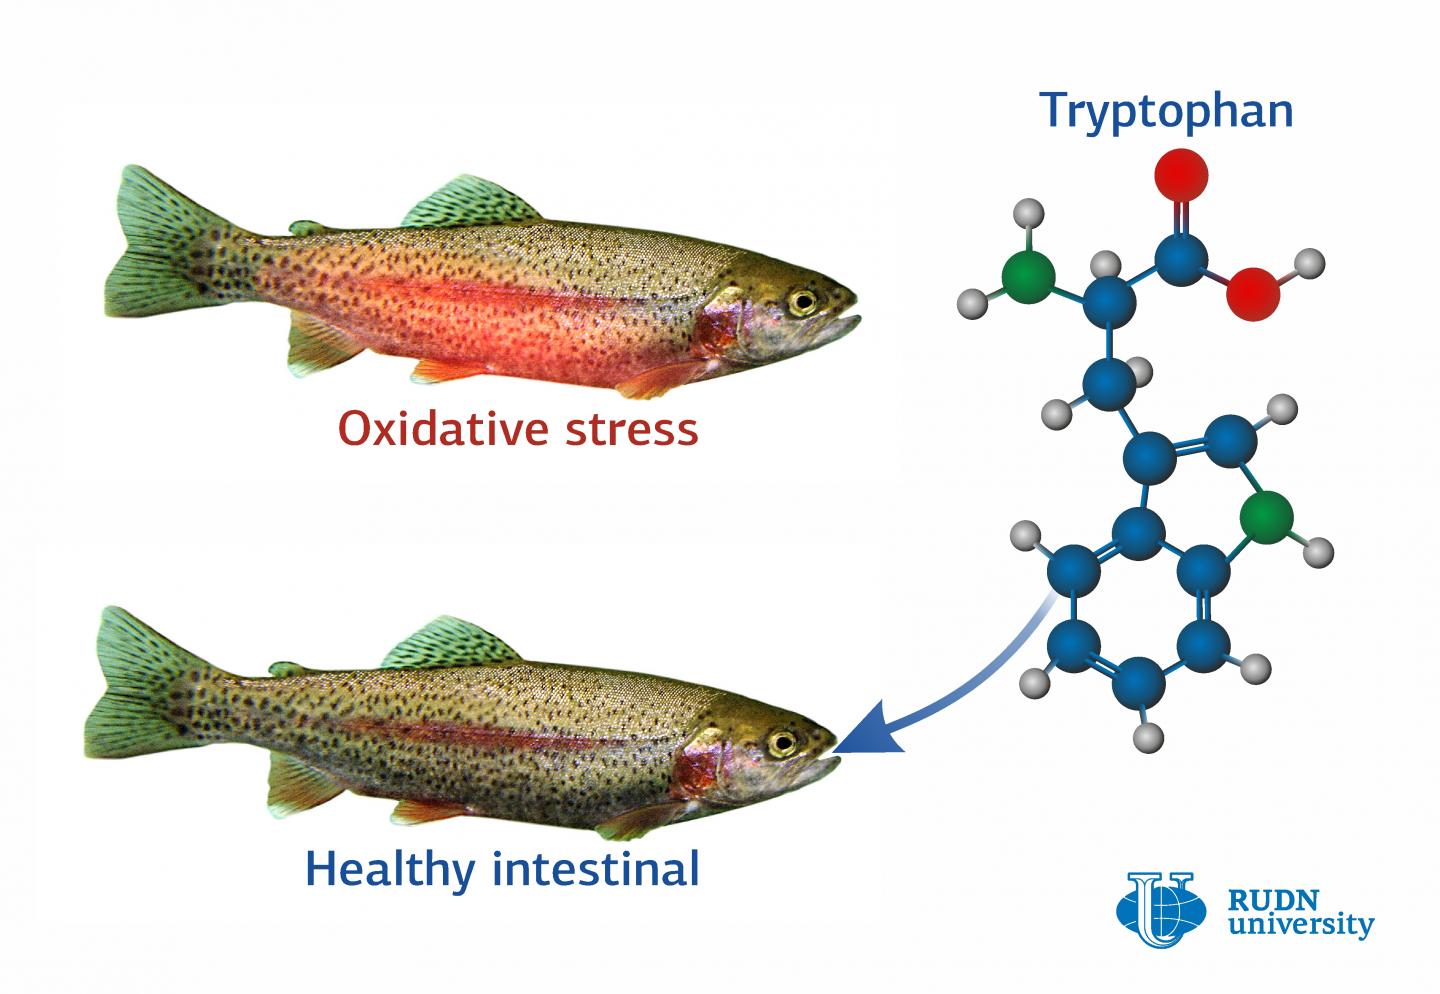 Tryptophan Supports the Work of Intestinal Tract in Trouts Under Stress, Says a biologist from RUDN University